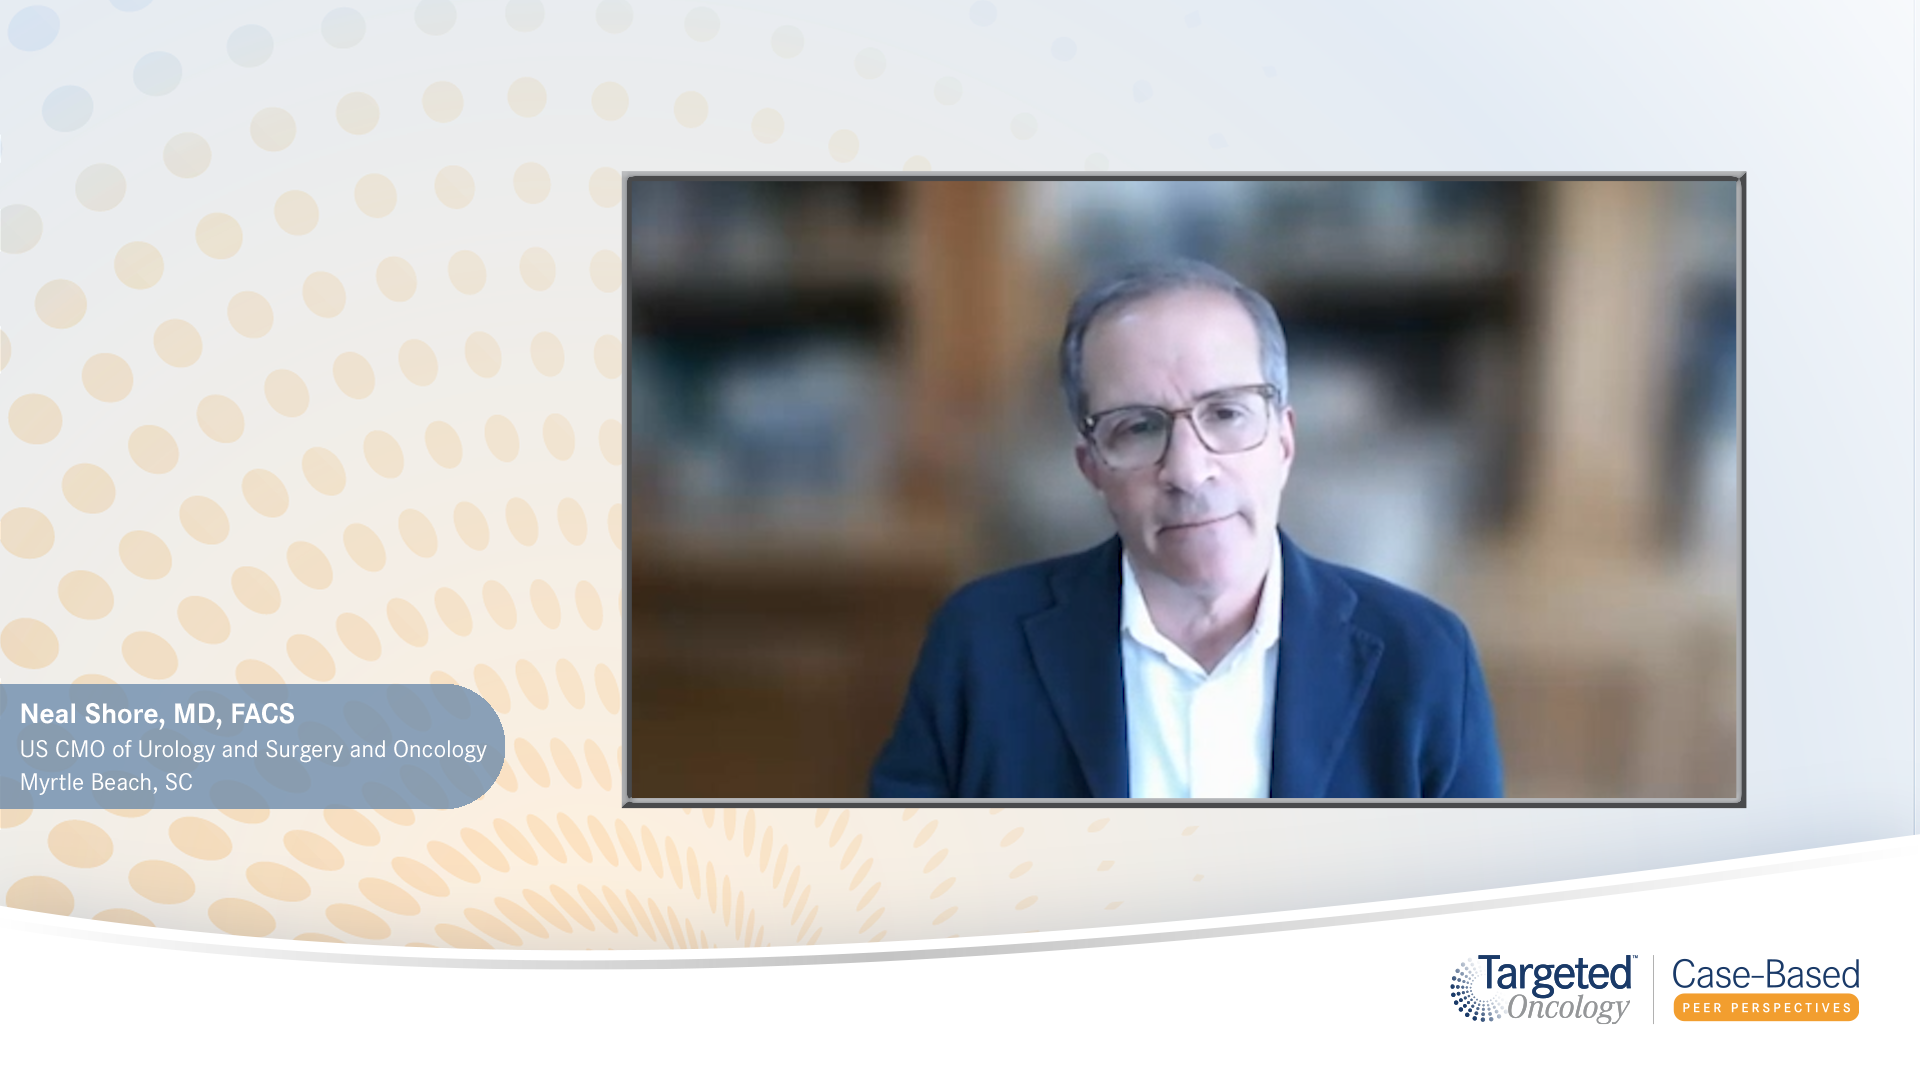 Video 4 - "Integrating ARAMIS Trial Data and Managing Adverse Events in nmCRPC Treatment"